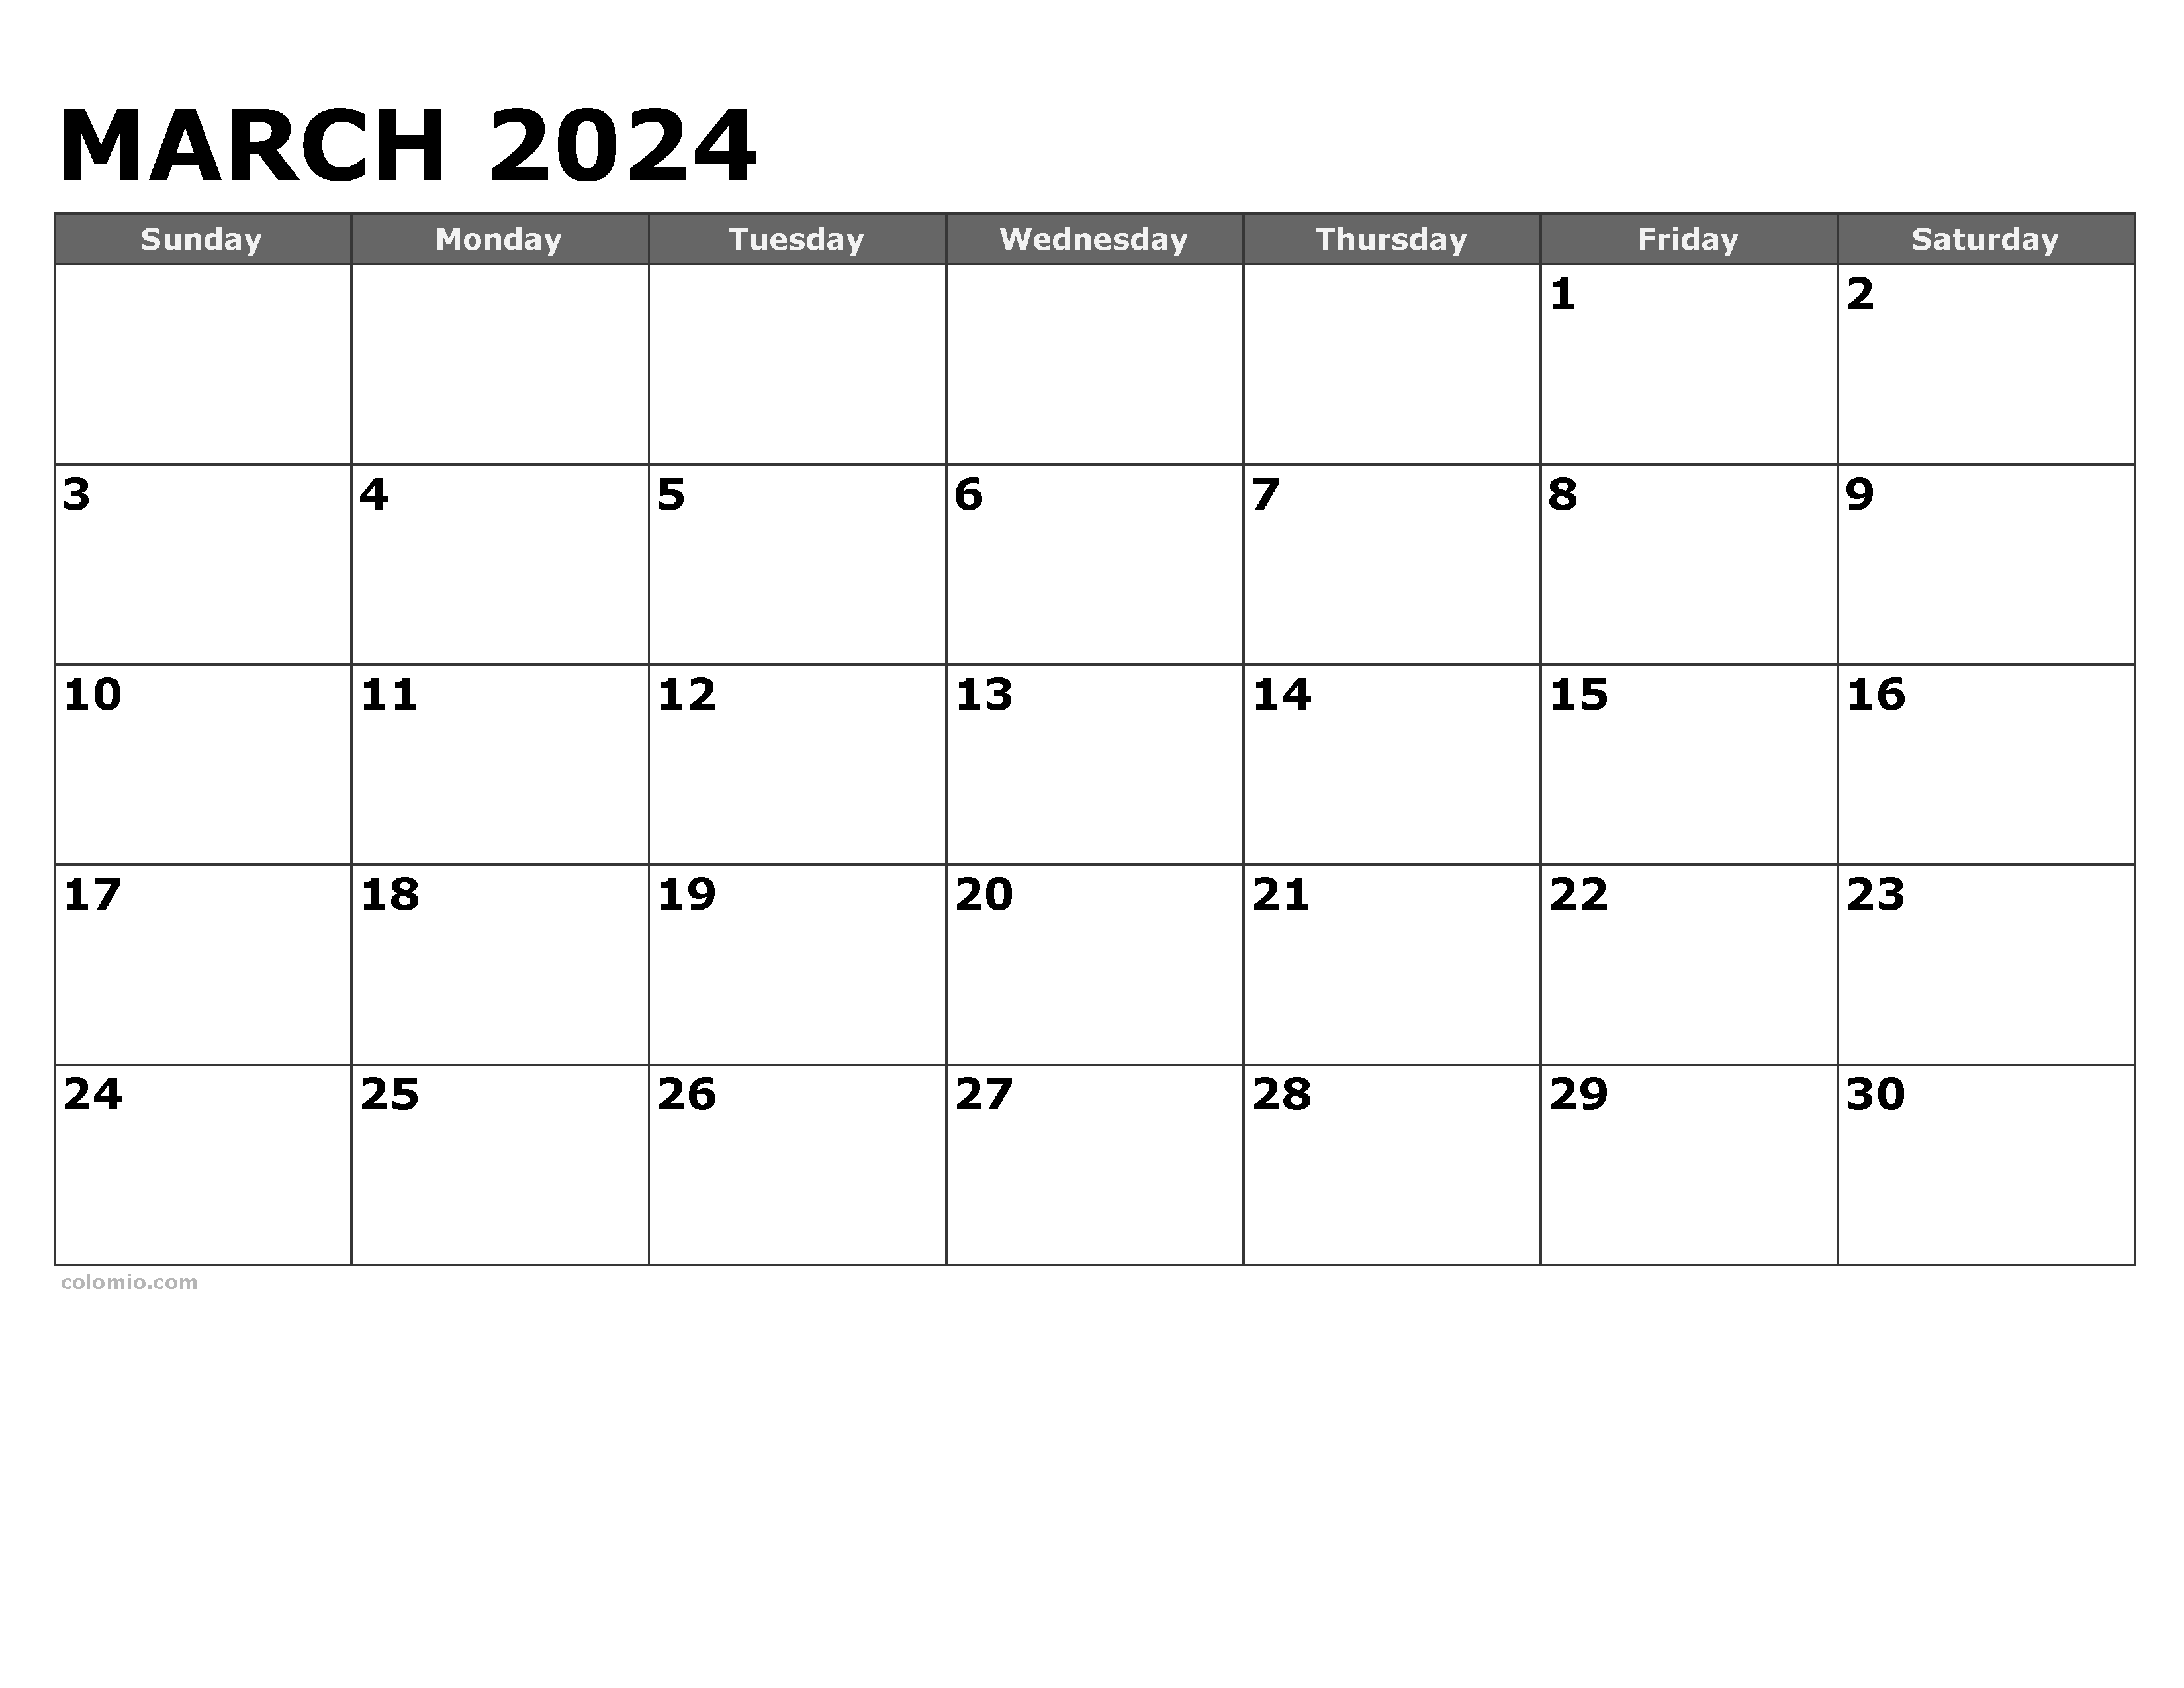 March 2024 Calendar | Free Printable Pdf, Xls And Png throughout Free Printable Blank March Calendar 2024